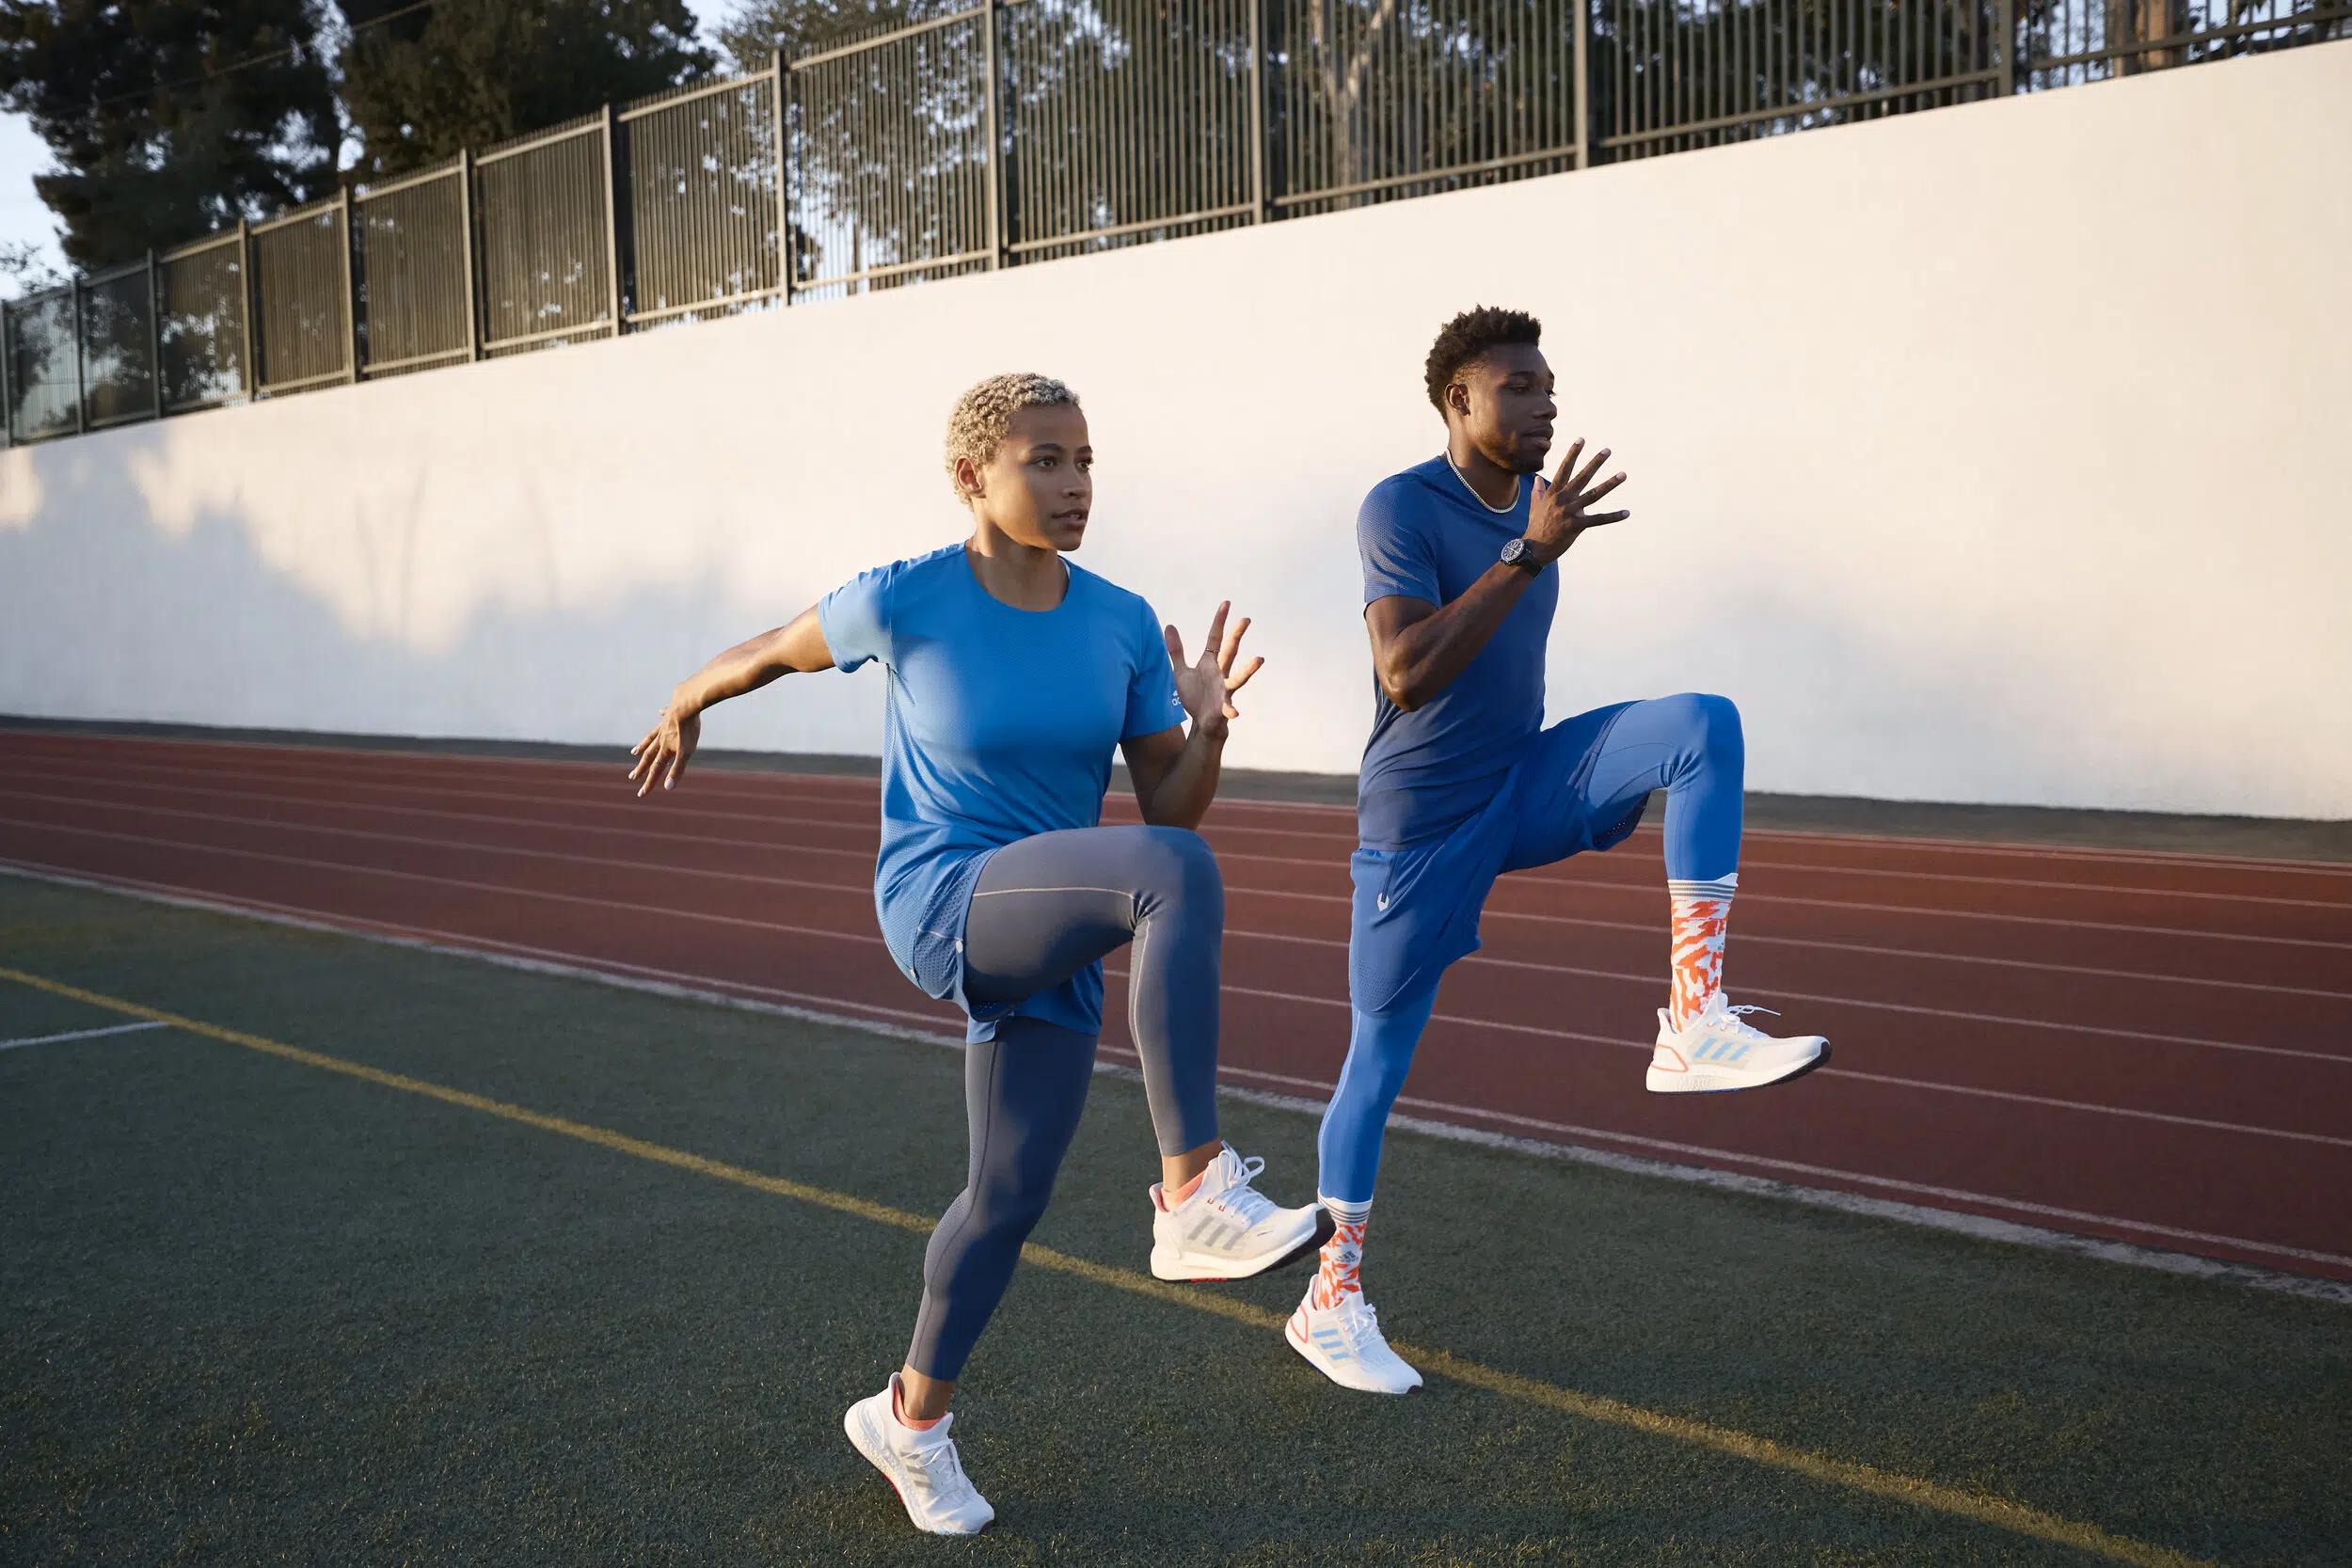 Two people excercising